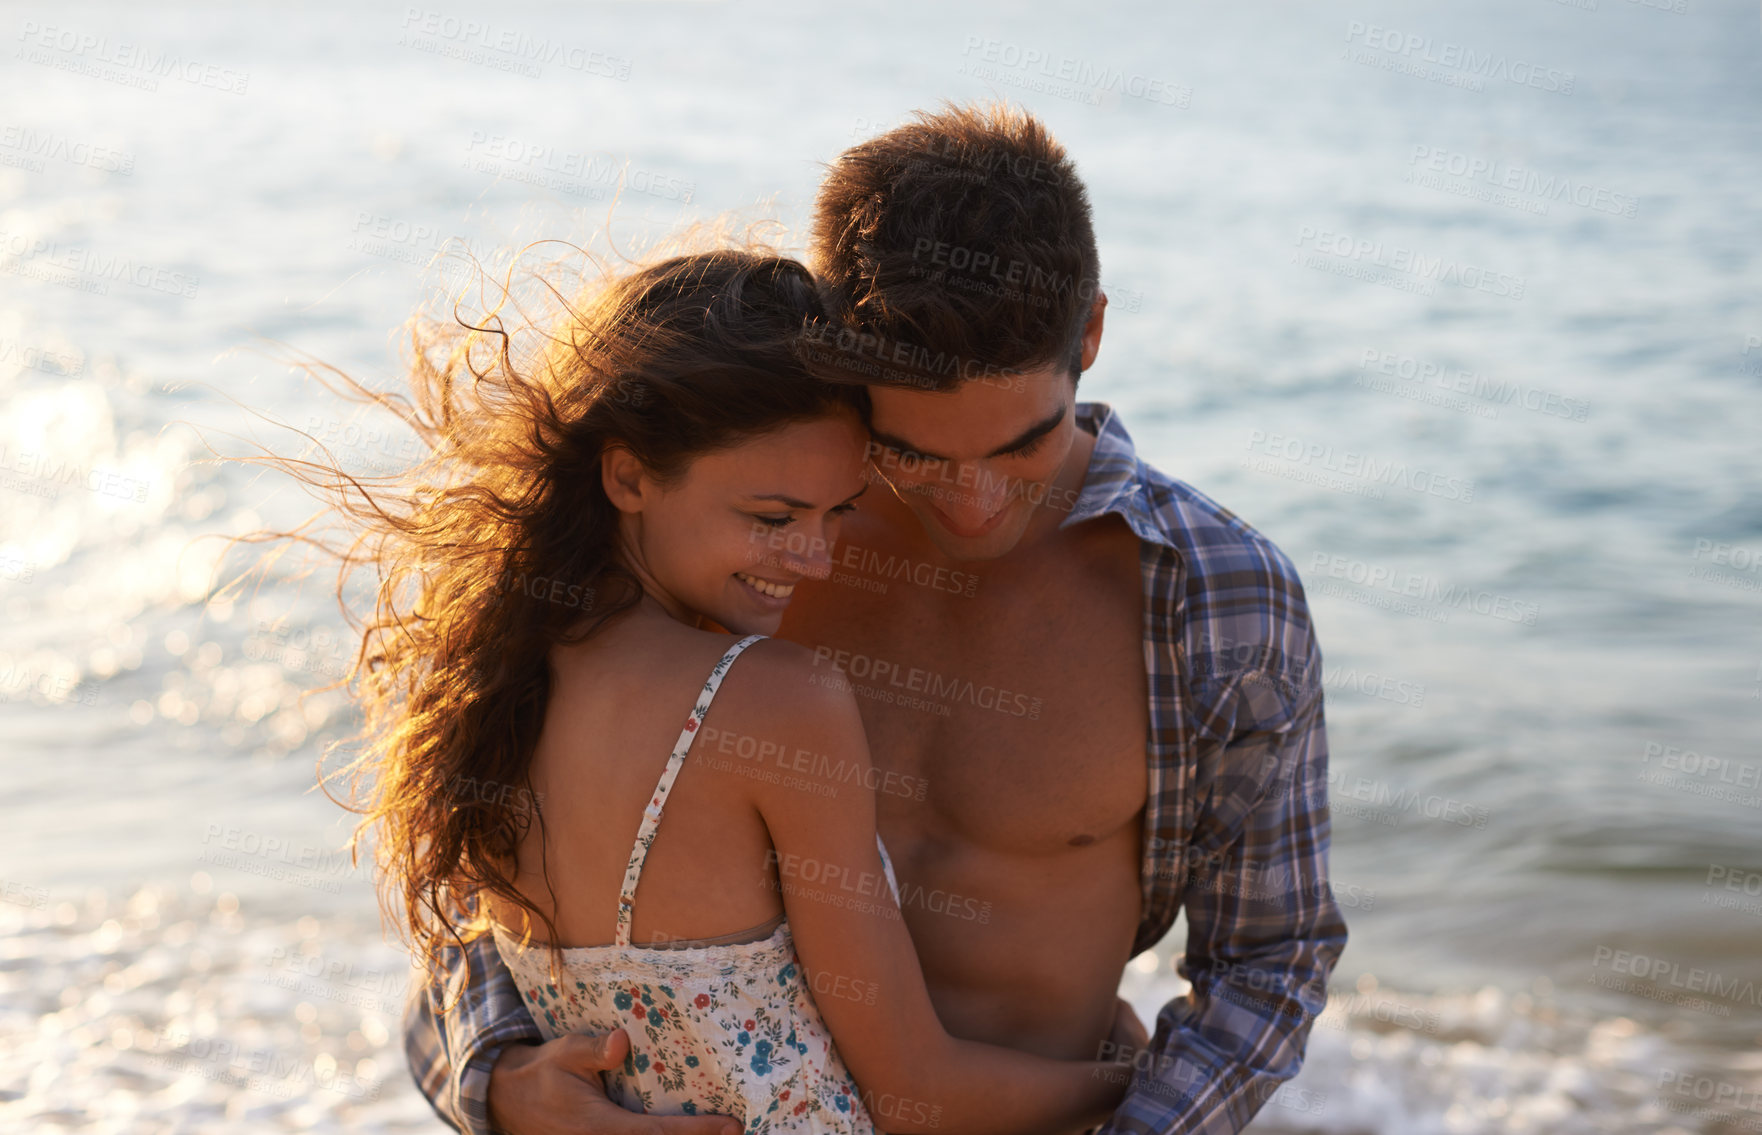 Buy stock photo Sunshine, couple hug on beach and ocean, travel for anniversary or date with bonding, love and support. Affection, peace and fresh air in nature, people outdoor with trust and care in relationship